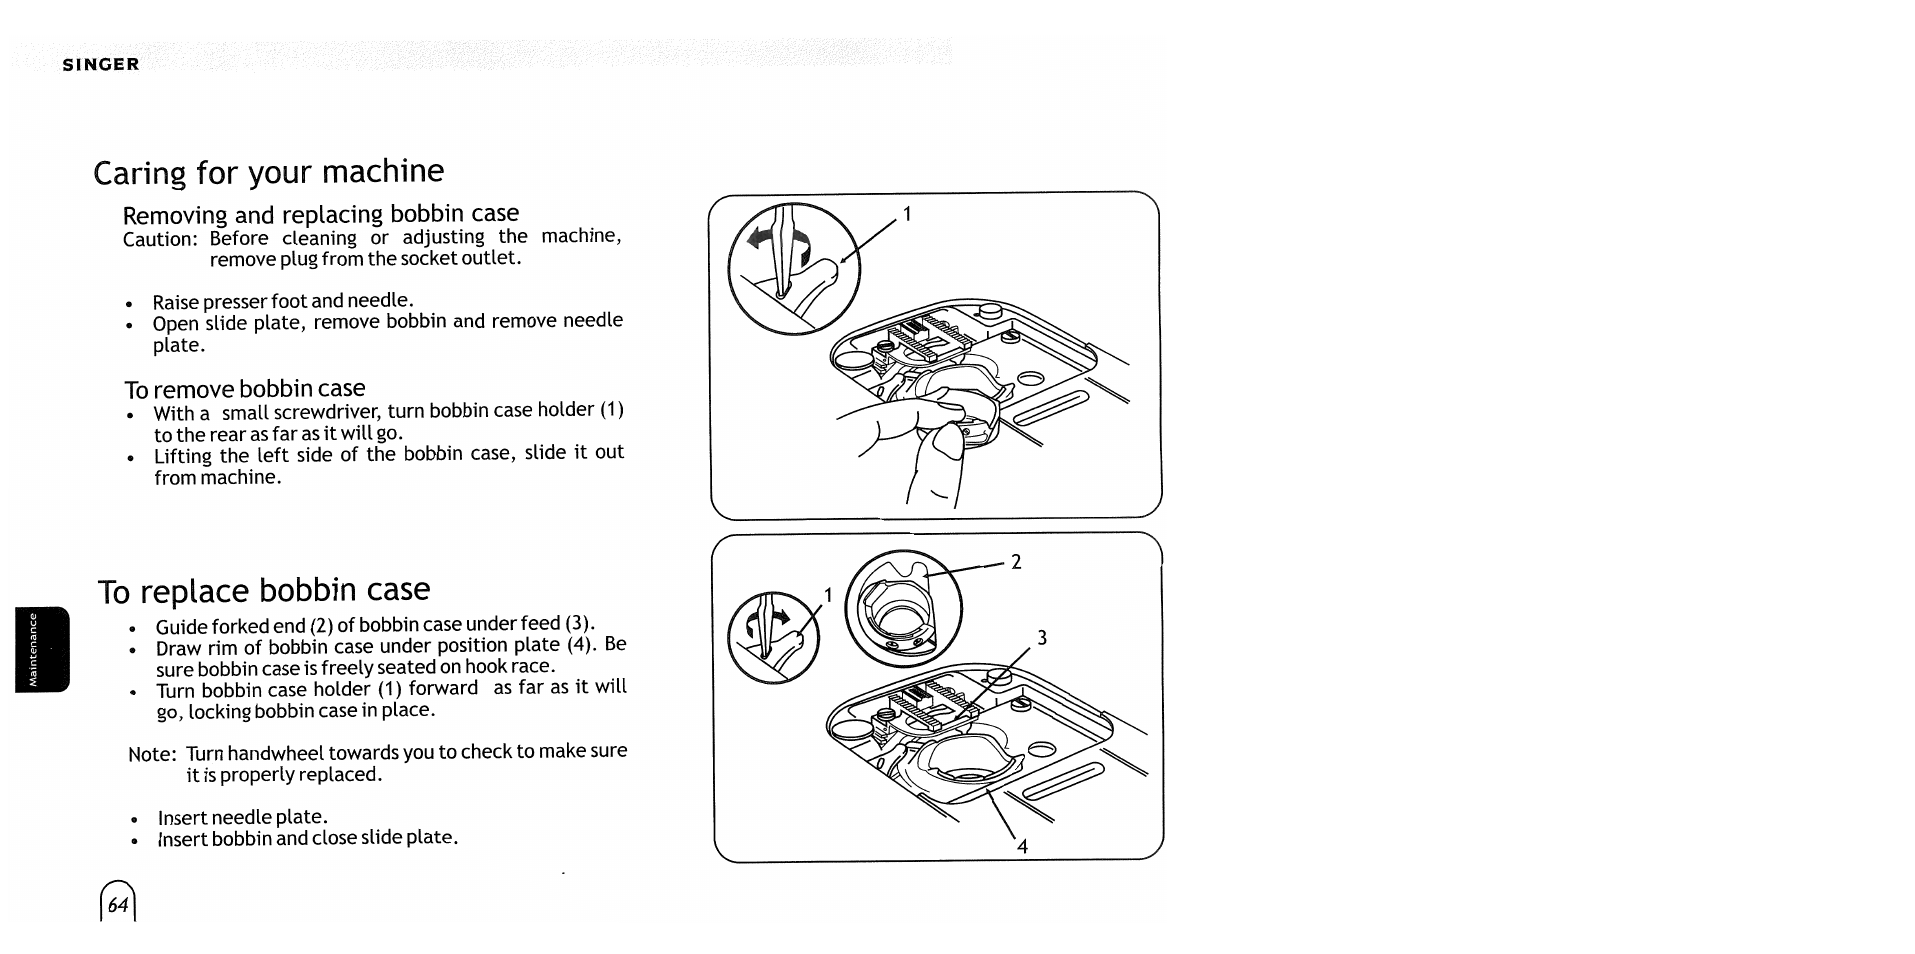 Caring for your machine, Removing and replacing bobbin case, To remove bobbin case | To replace bobbin case | SINGER 2517 Merritt User Manual | Page 67 / 80